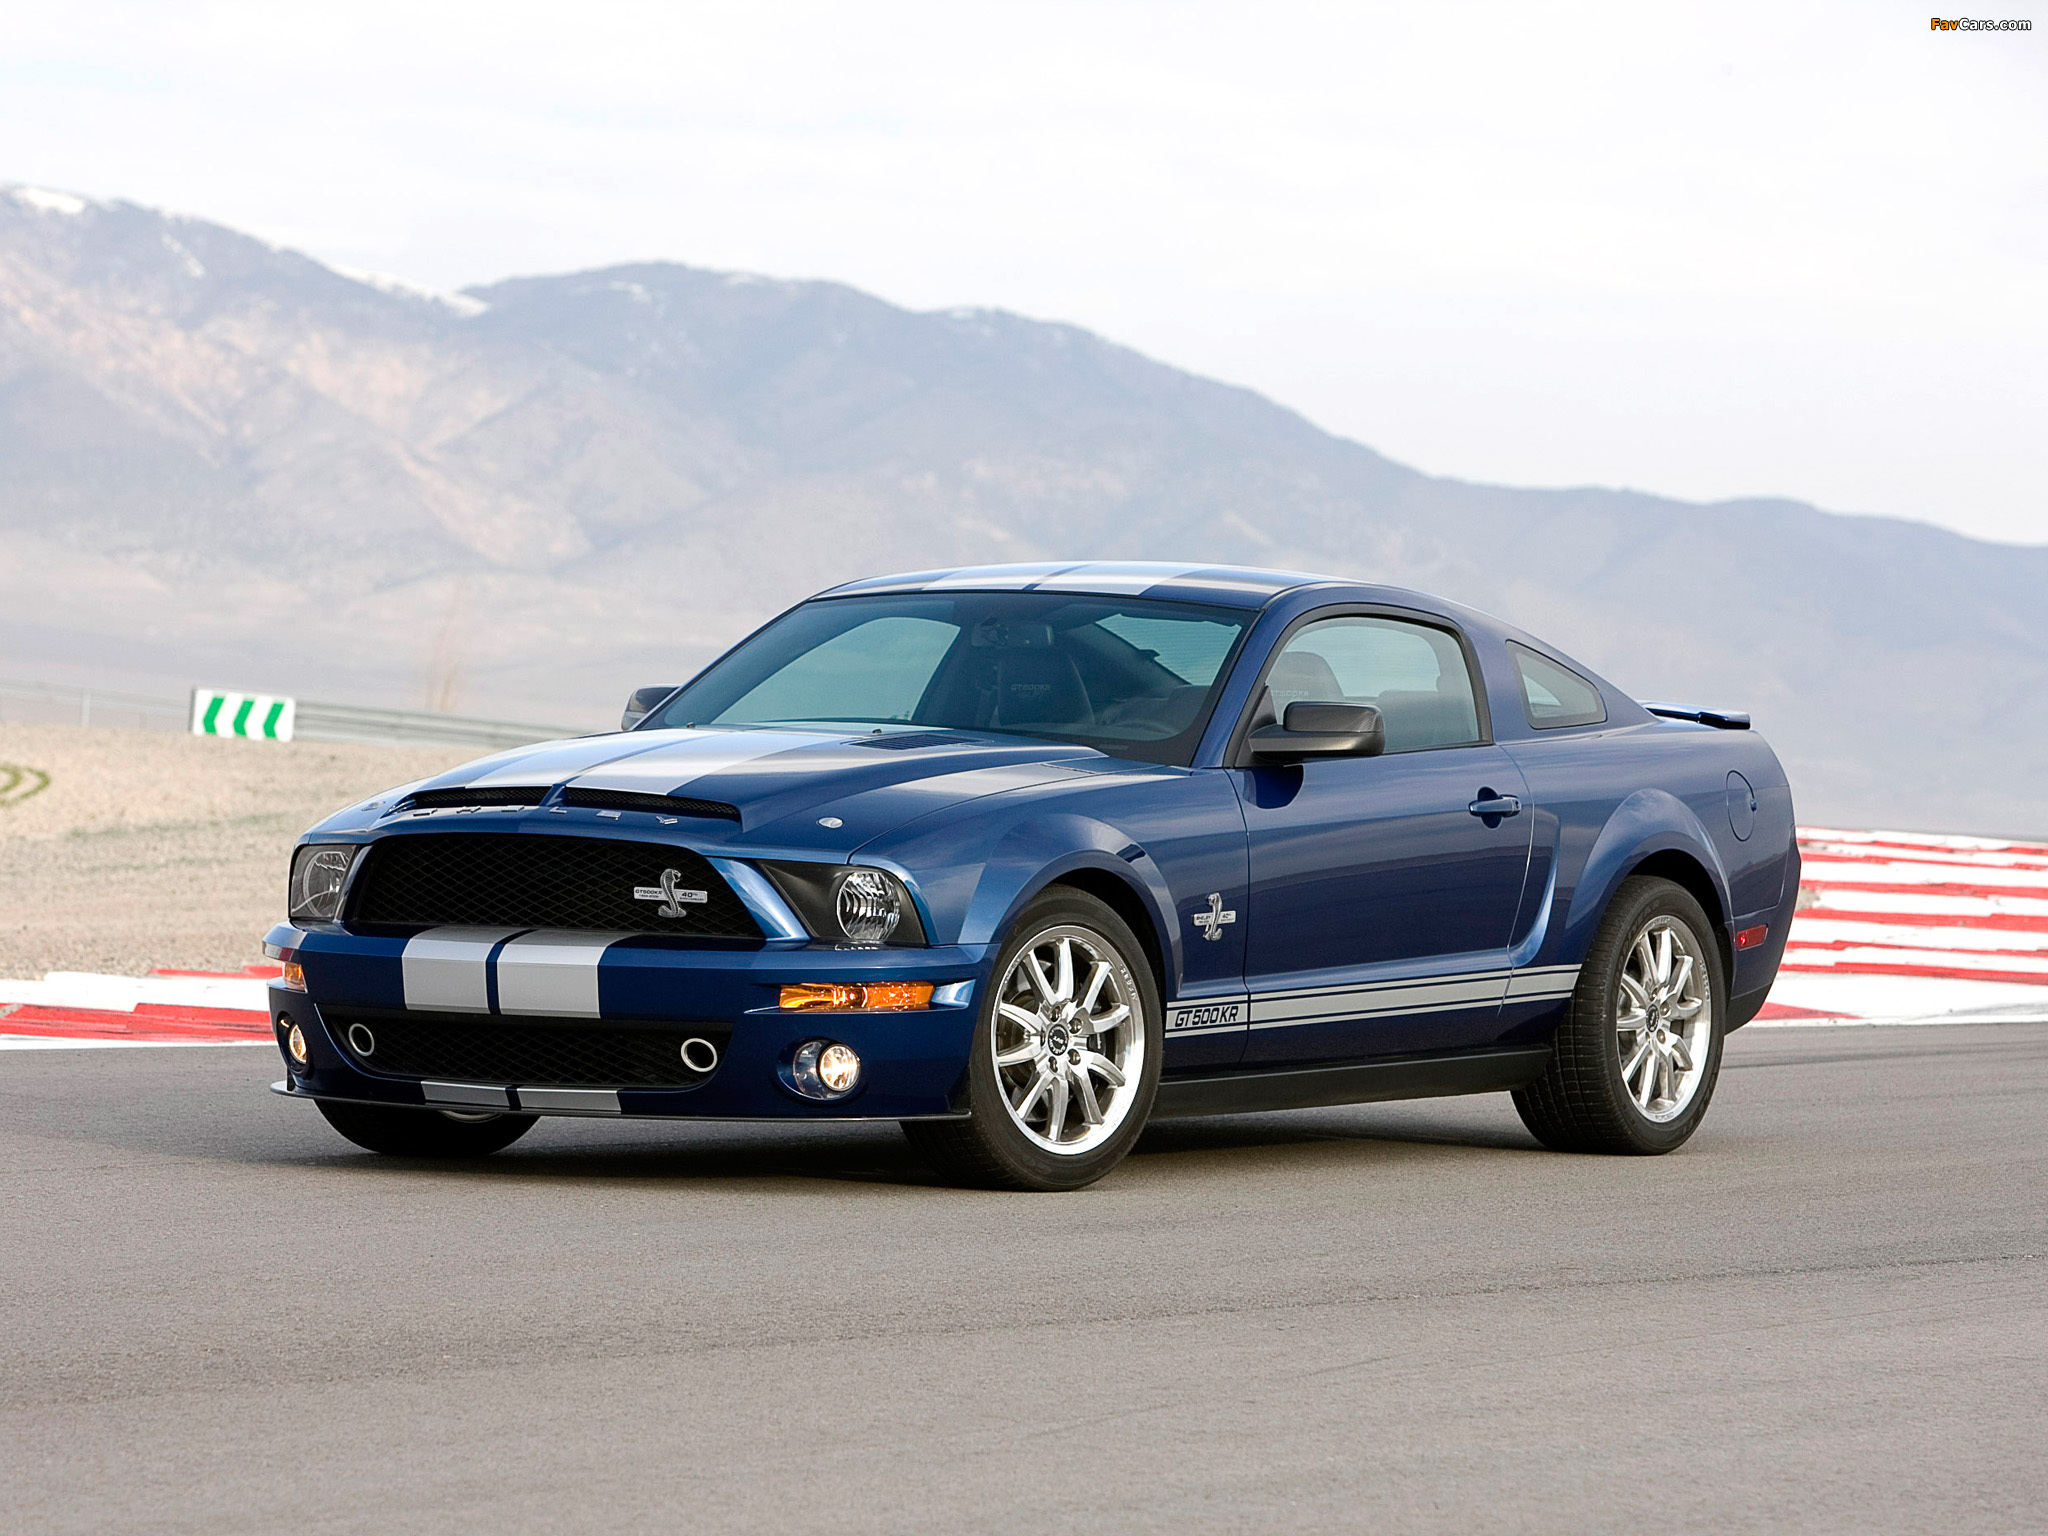 2008 Shelby GT500 KR "40th Anniversary" Wallpaper Collection.